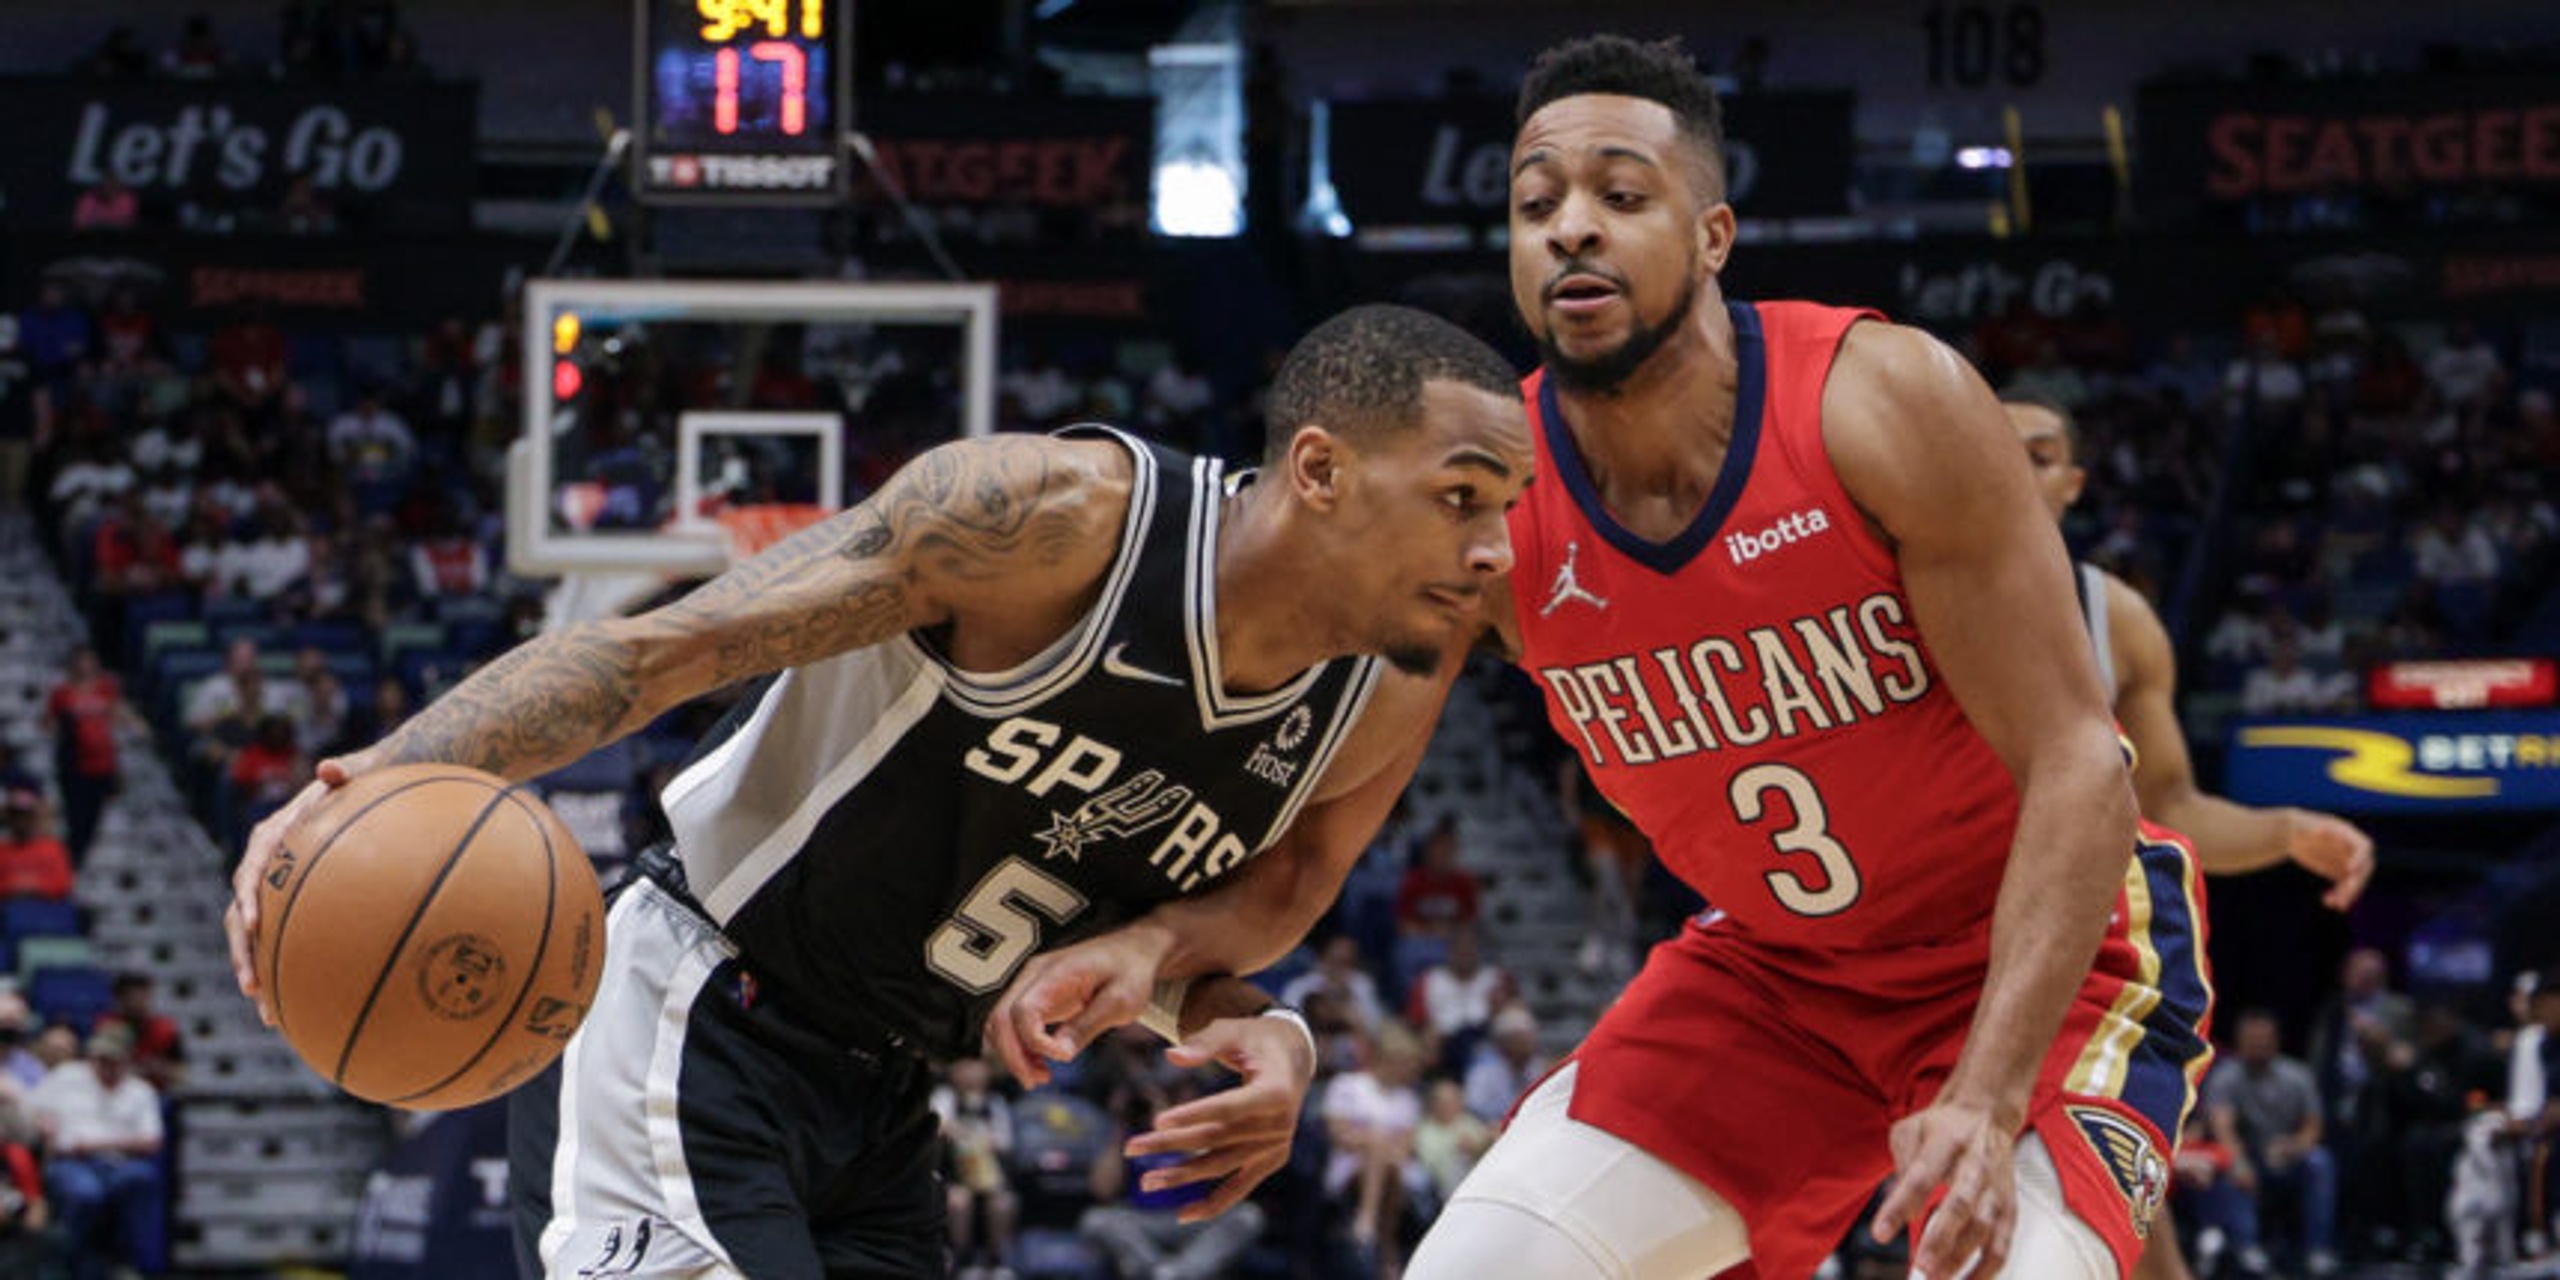 Pelicans-Spurs Play-In Tournament matchup a study in resilience